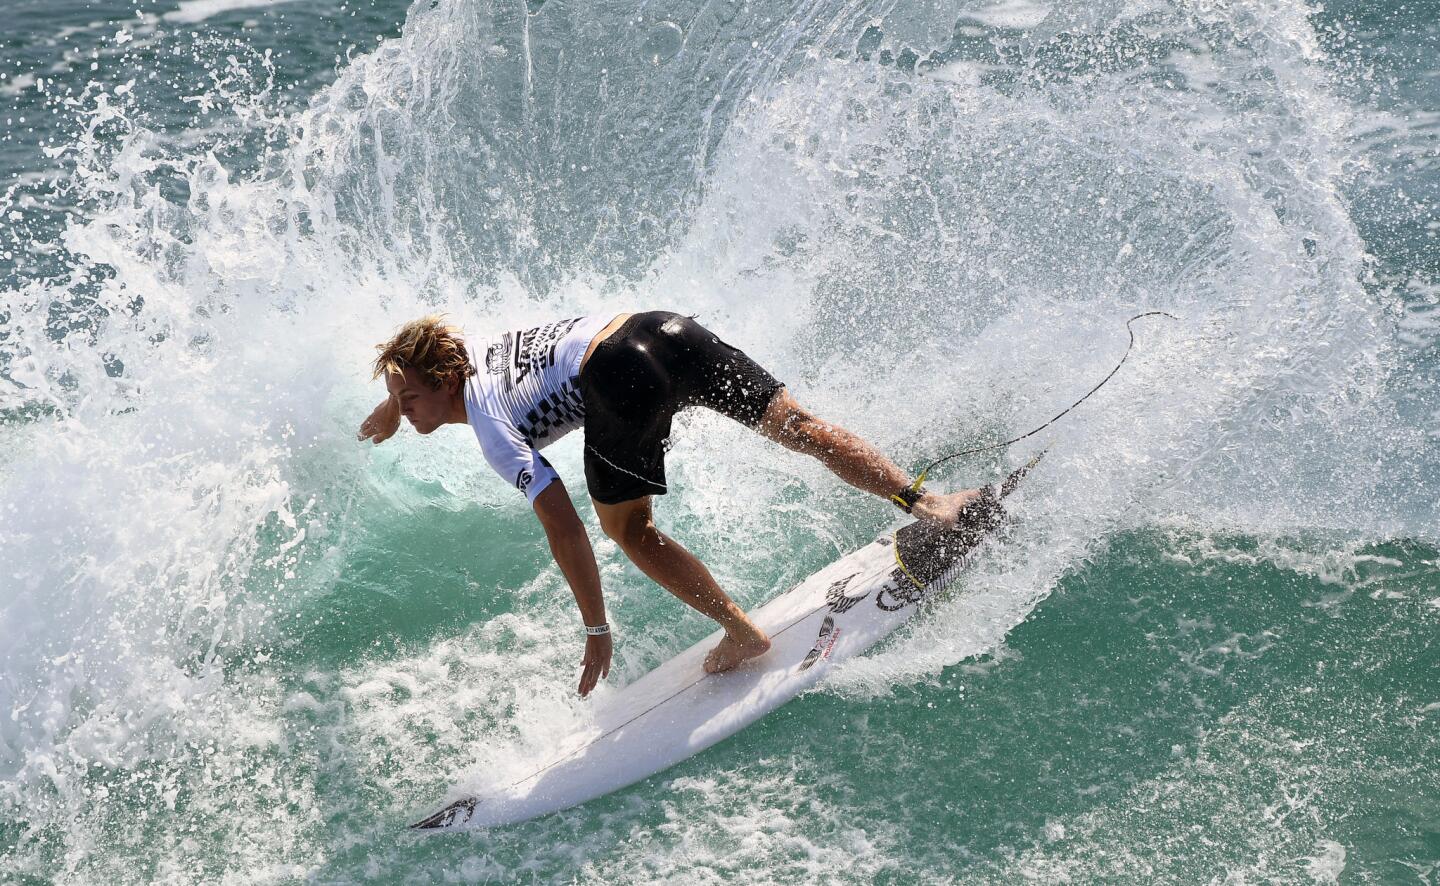 Cody Young surfs his way to a championship in in the junior men's heat at the Vans U.S. Open Surf Champioships in Huntington Beach.